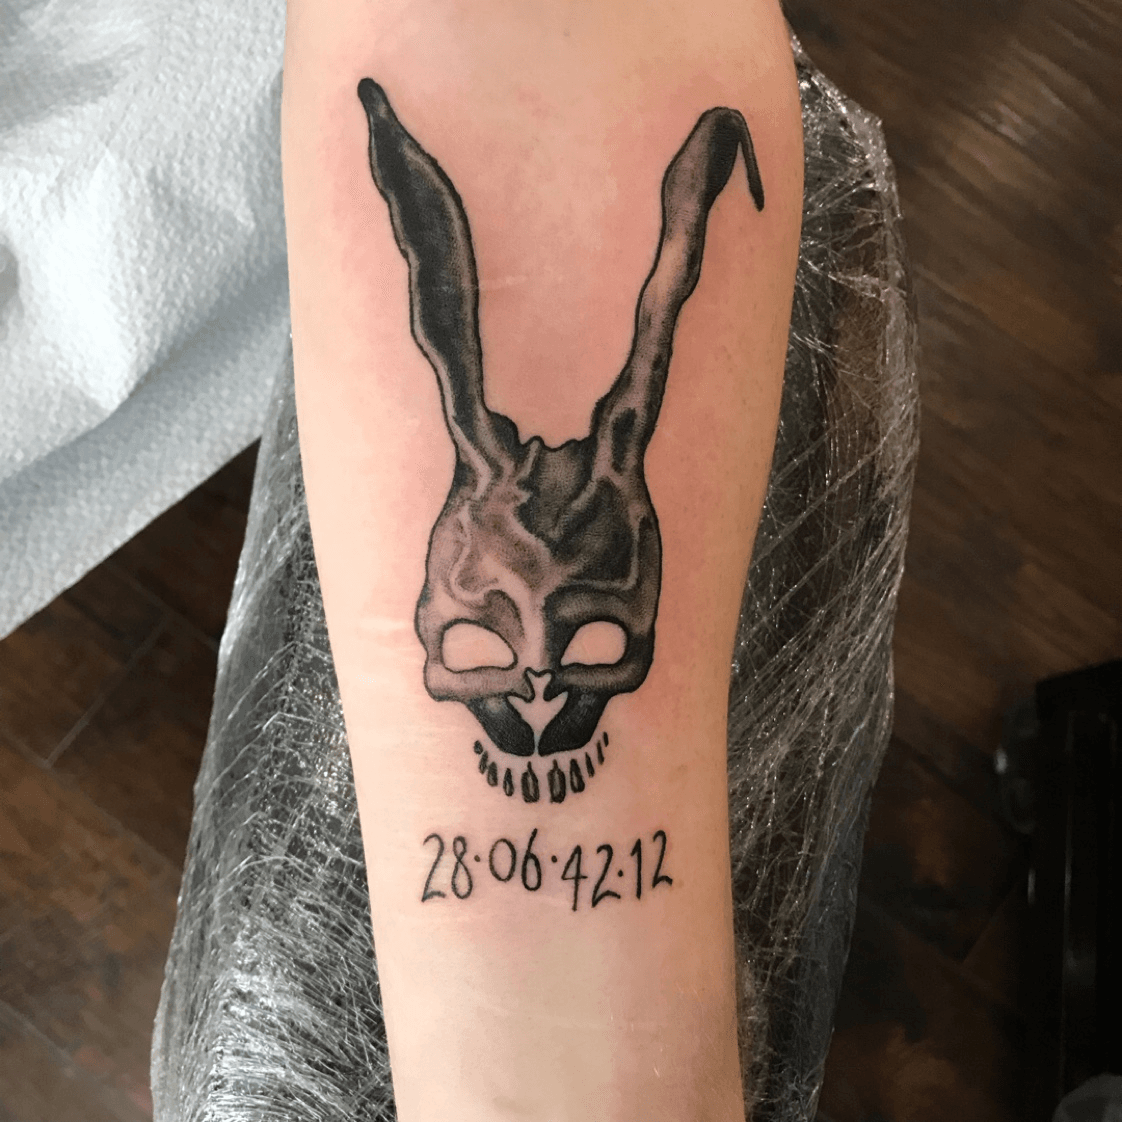 Tattoo uploaded by Jade Barrett  Black and grey Frank the Bunny from Donnie  Darko More to come on this one  blue ink splashes in the back for next  time   Tattoodo